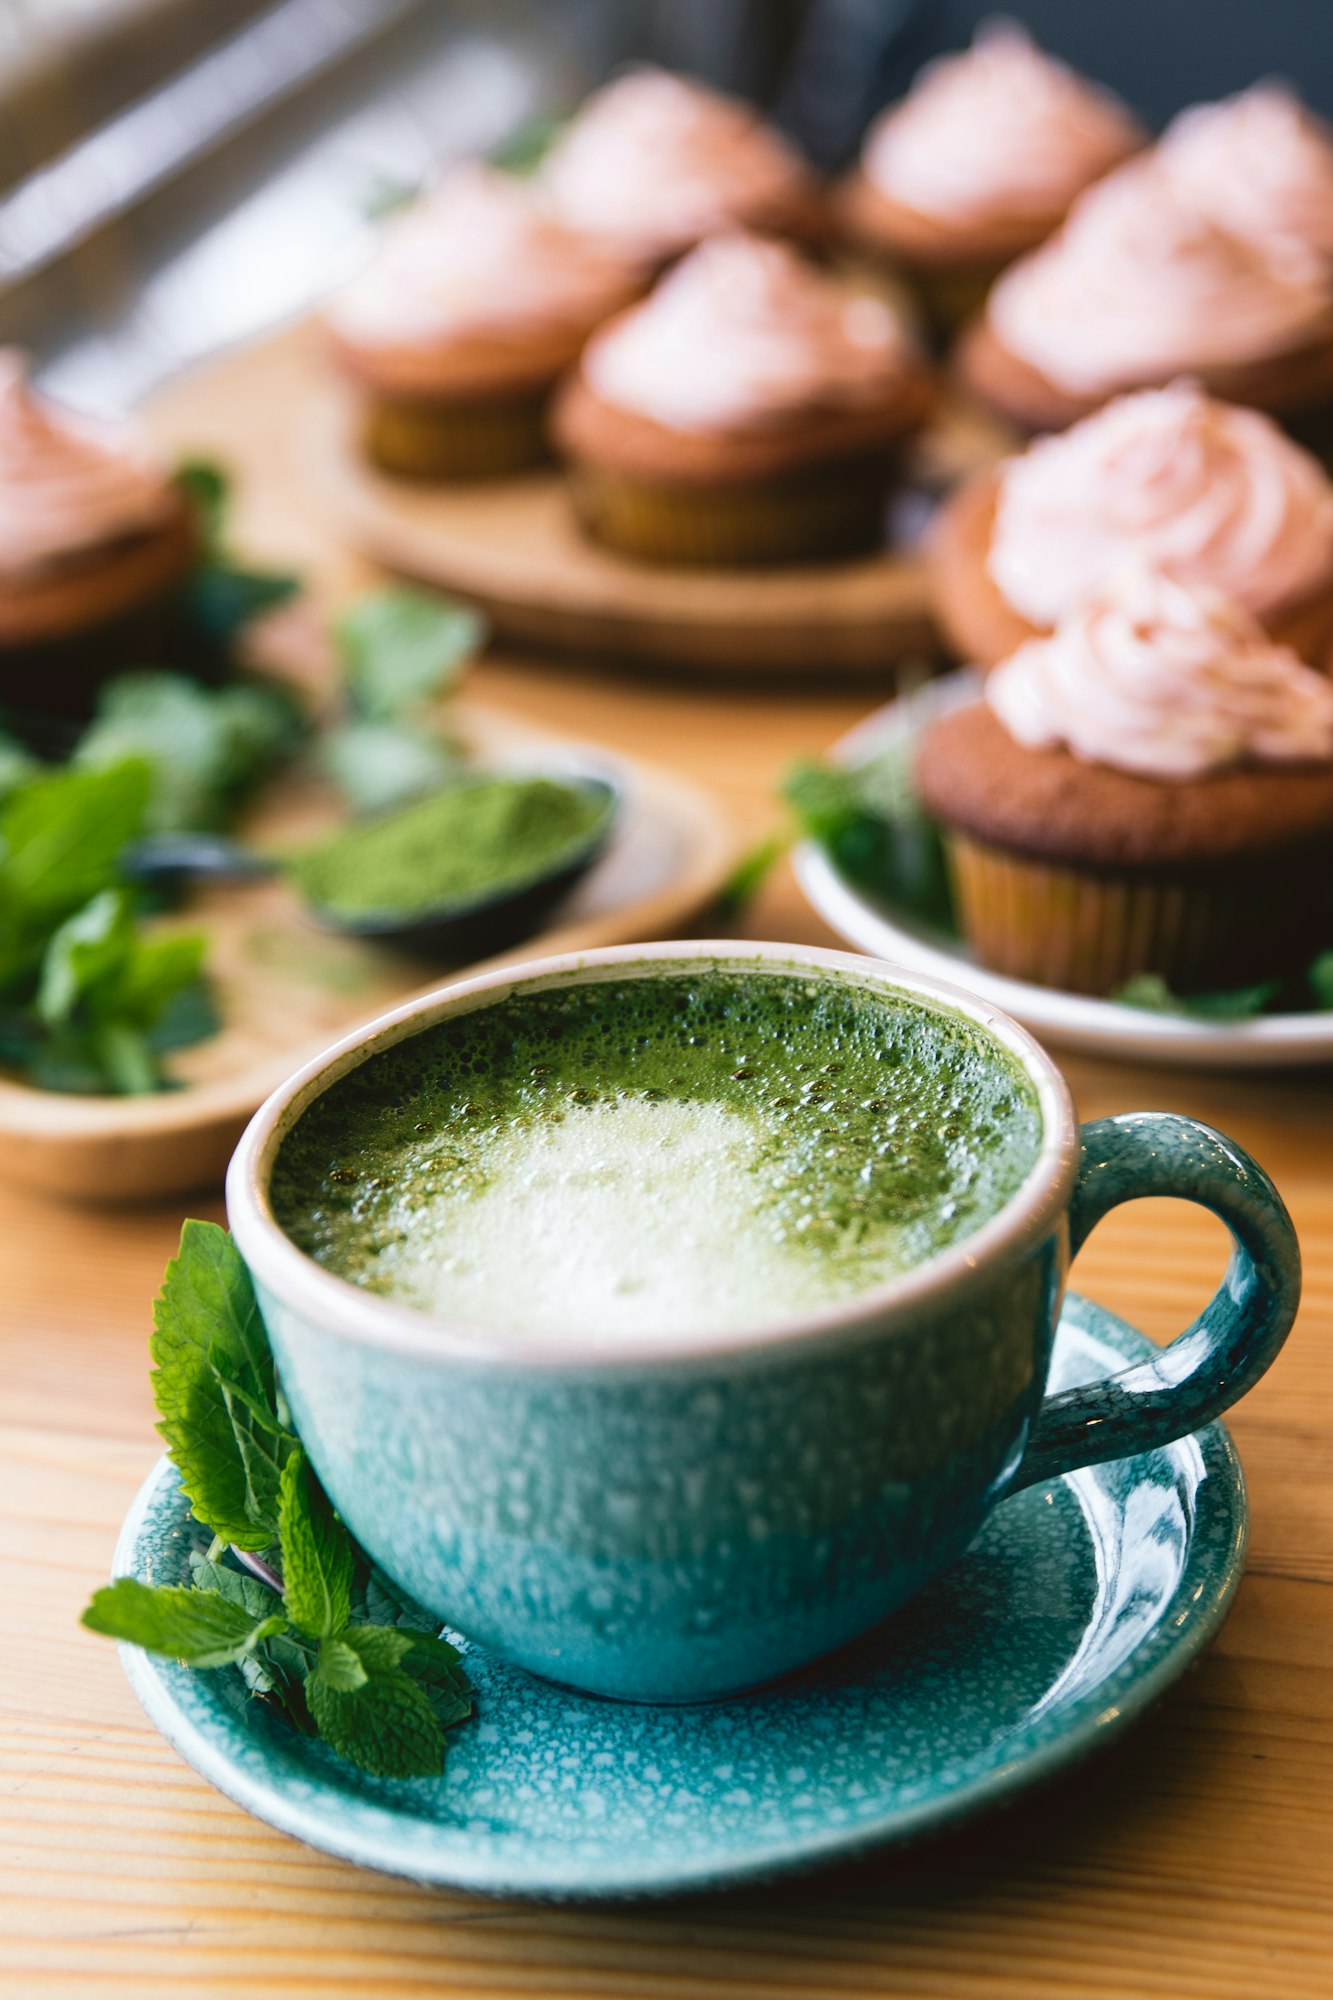 Scientific Evidence on Matcha and Digestion